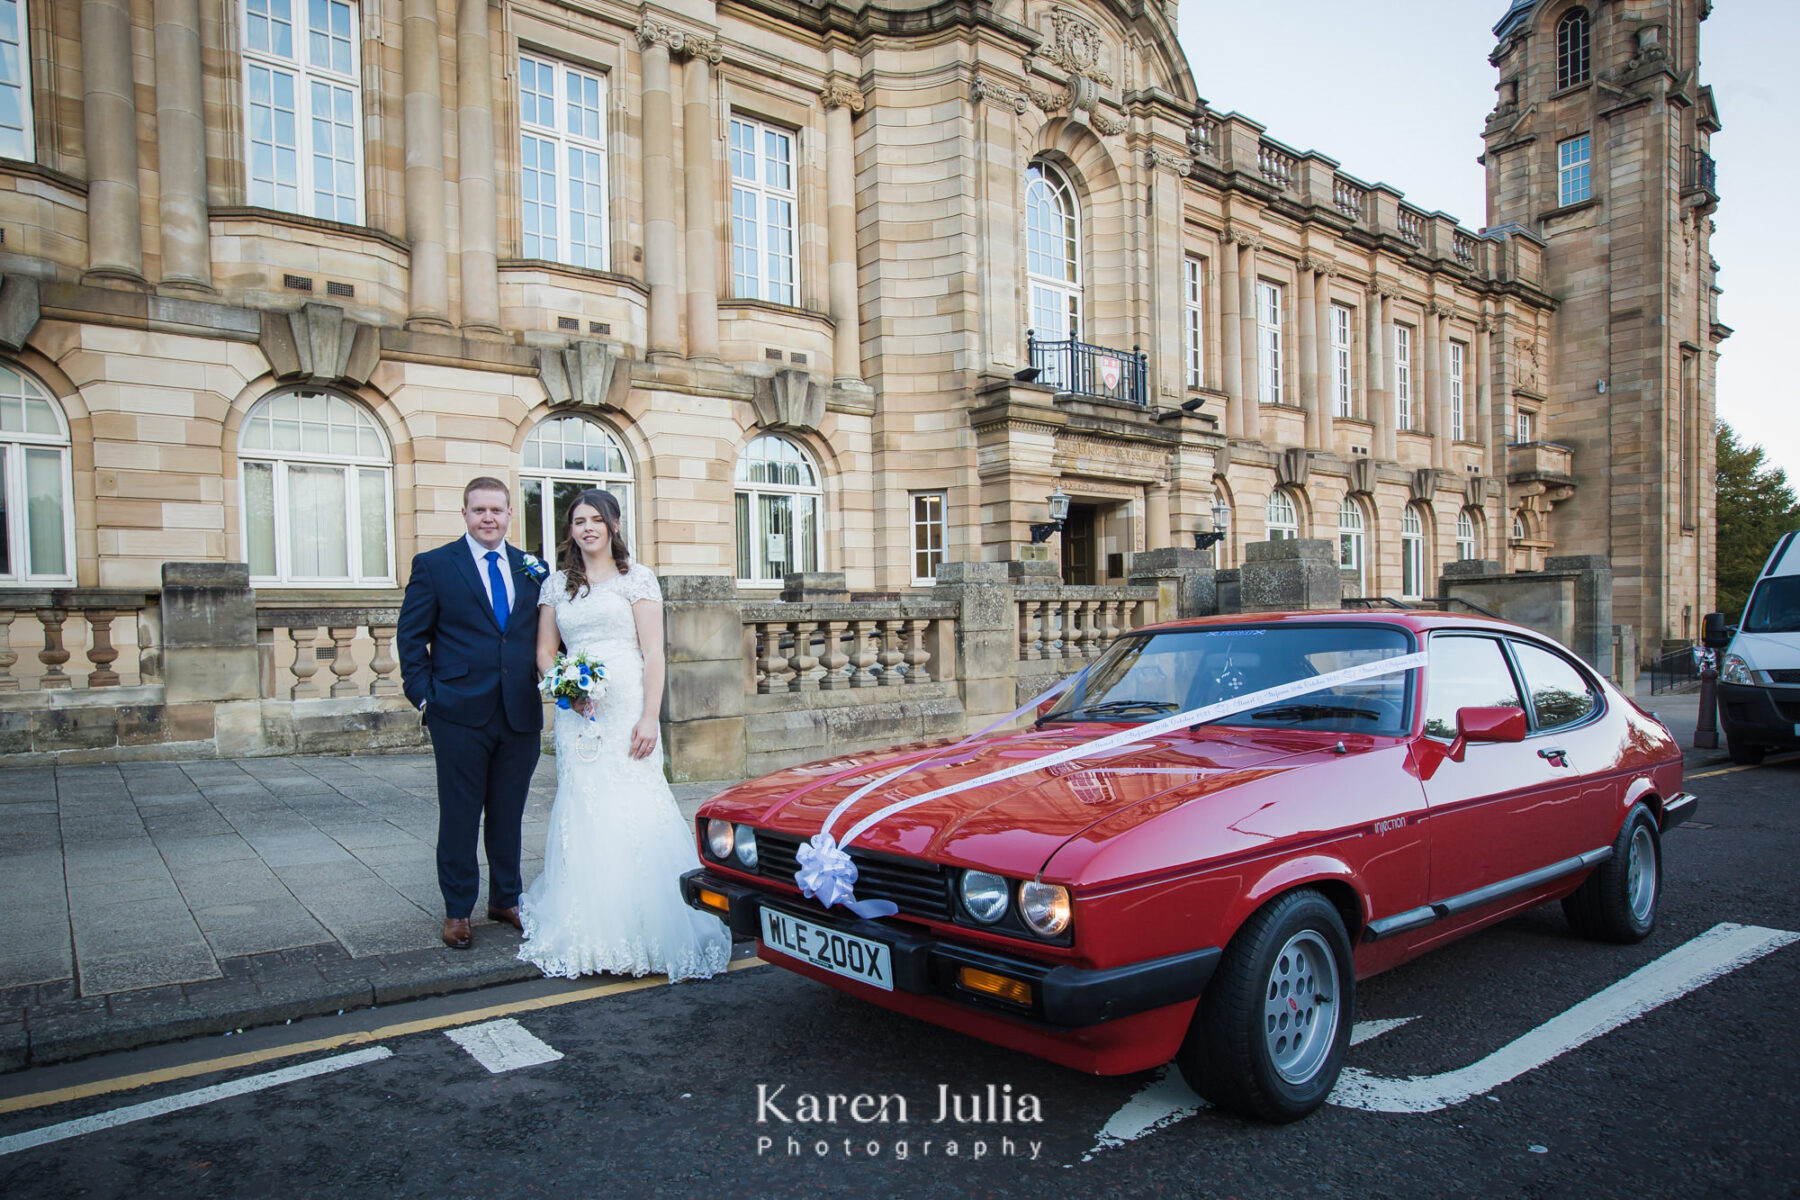 bride and groom pose for a portrait with their wedding car, a red Ford Capri